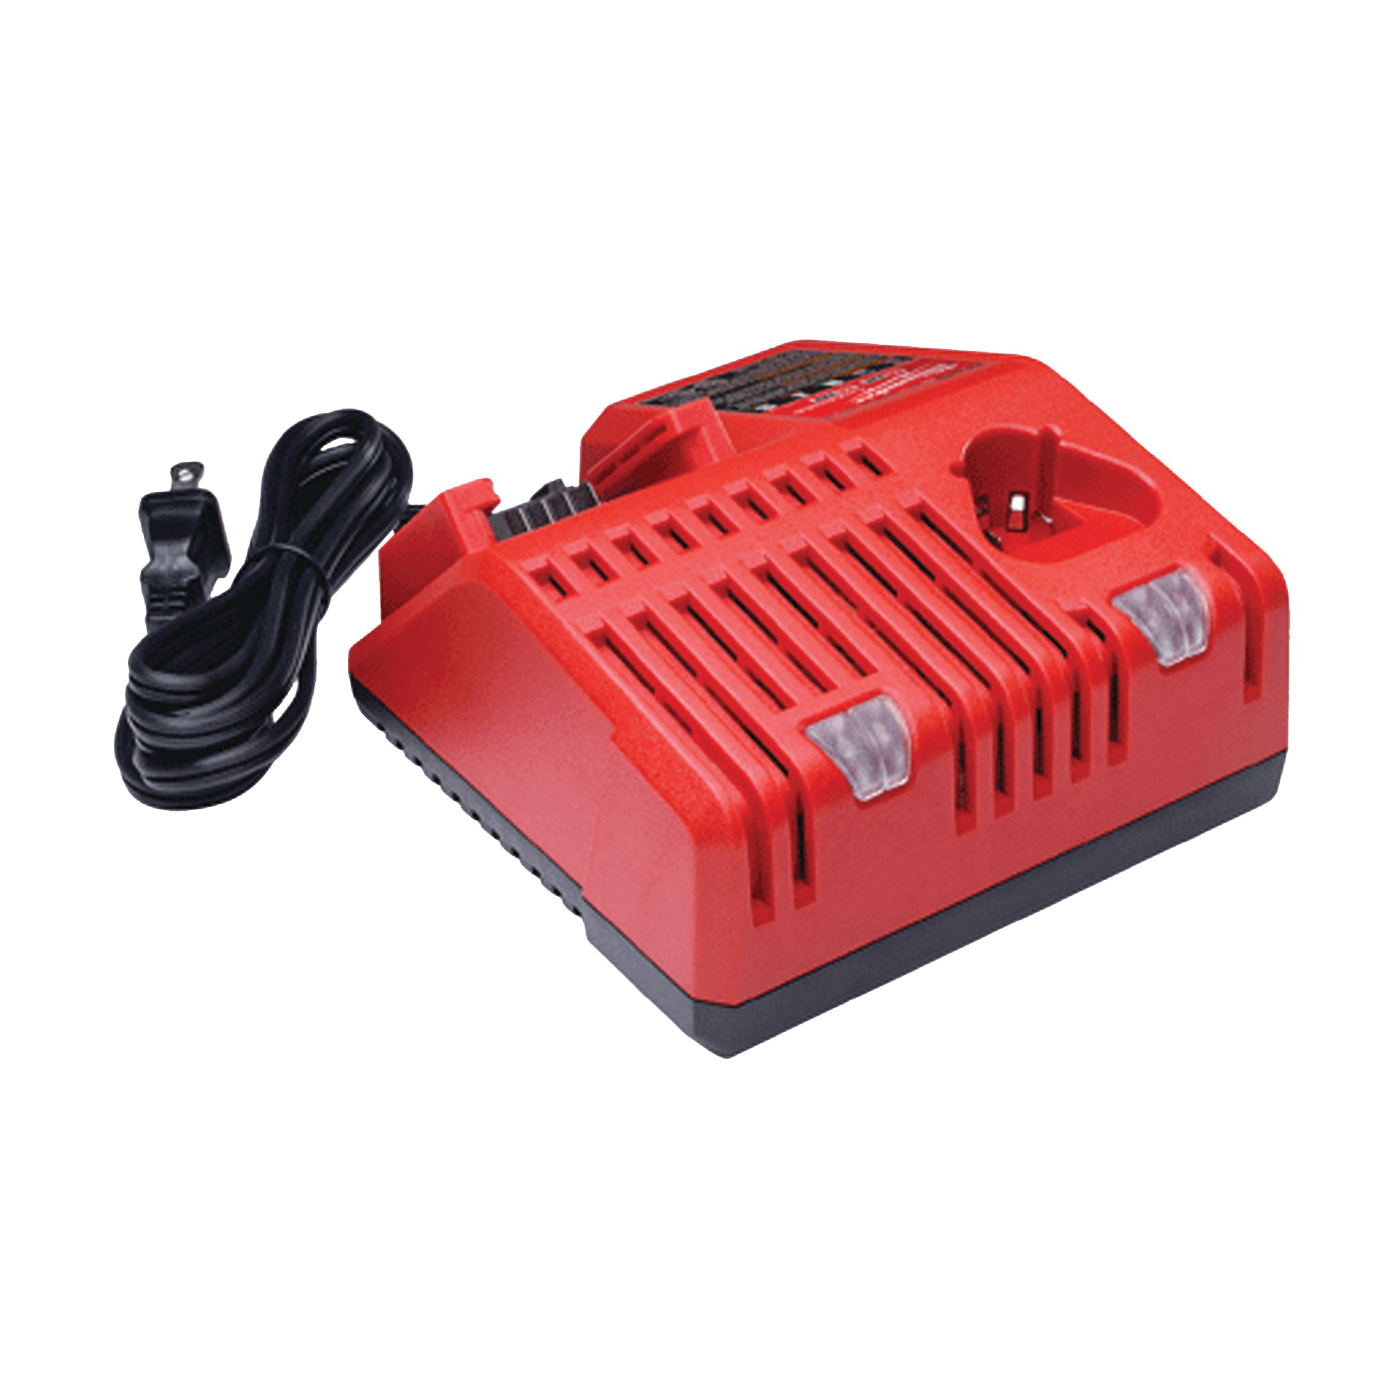 Milwaukee 48-59-1812 Multi-Voltage Charger, 12/18 V Input, 120 V Output, 1 hr Charge - 1